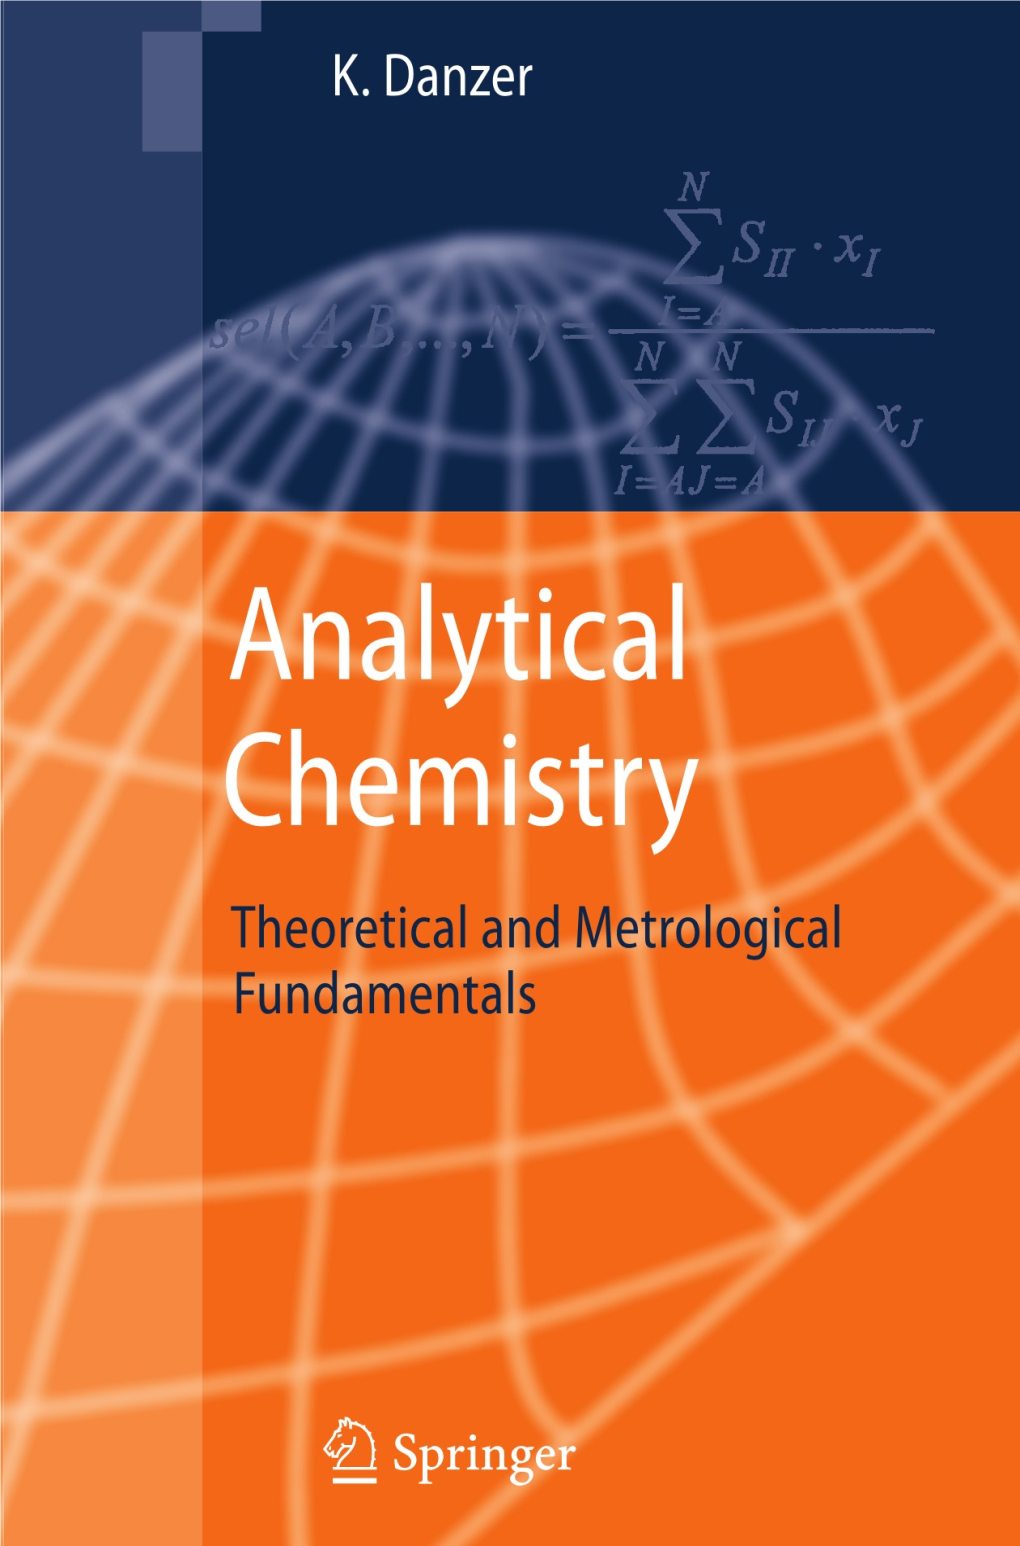 Analytical Chemistry Theoretical and Metrological Fundamentals K